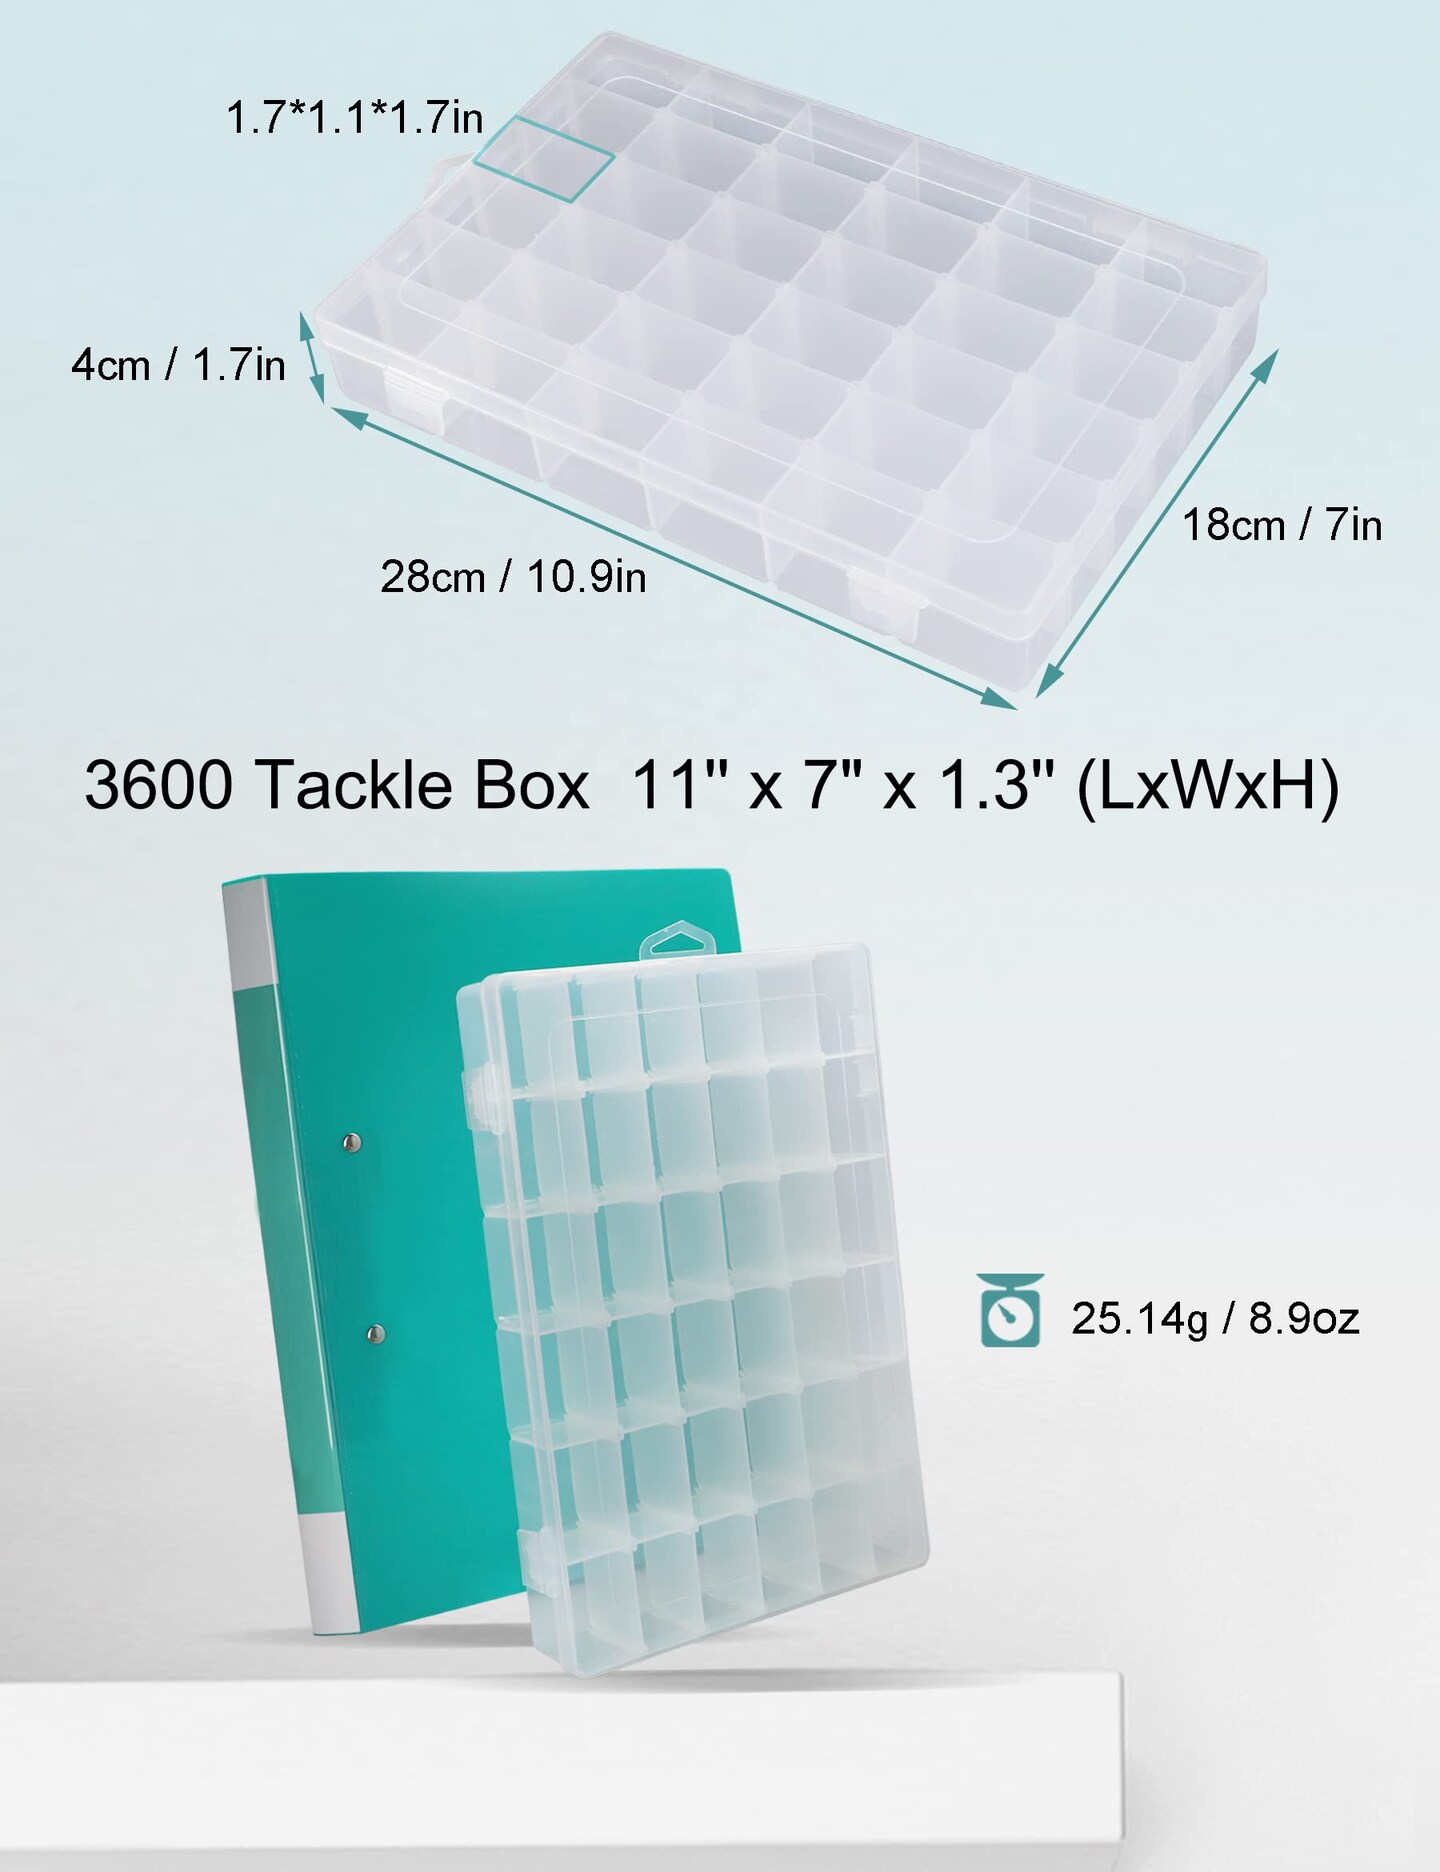 Avlcoaky Bead Organizer 2 Pack 3600 Tackle Box Organizer Clear Organizer Box 36 Grids Plastic Craft Organizer Jewelry Sewing Storage Box with Dividers